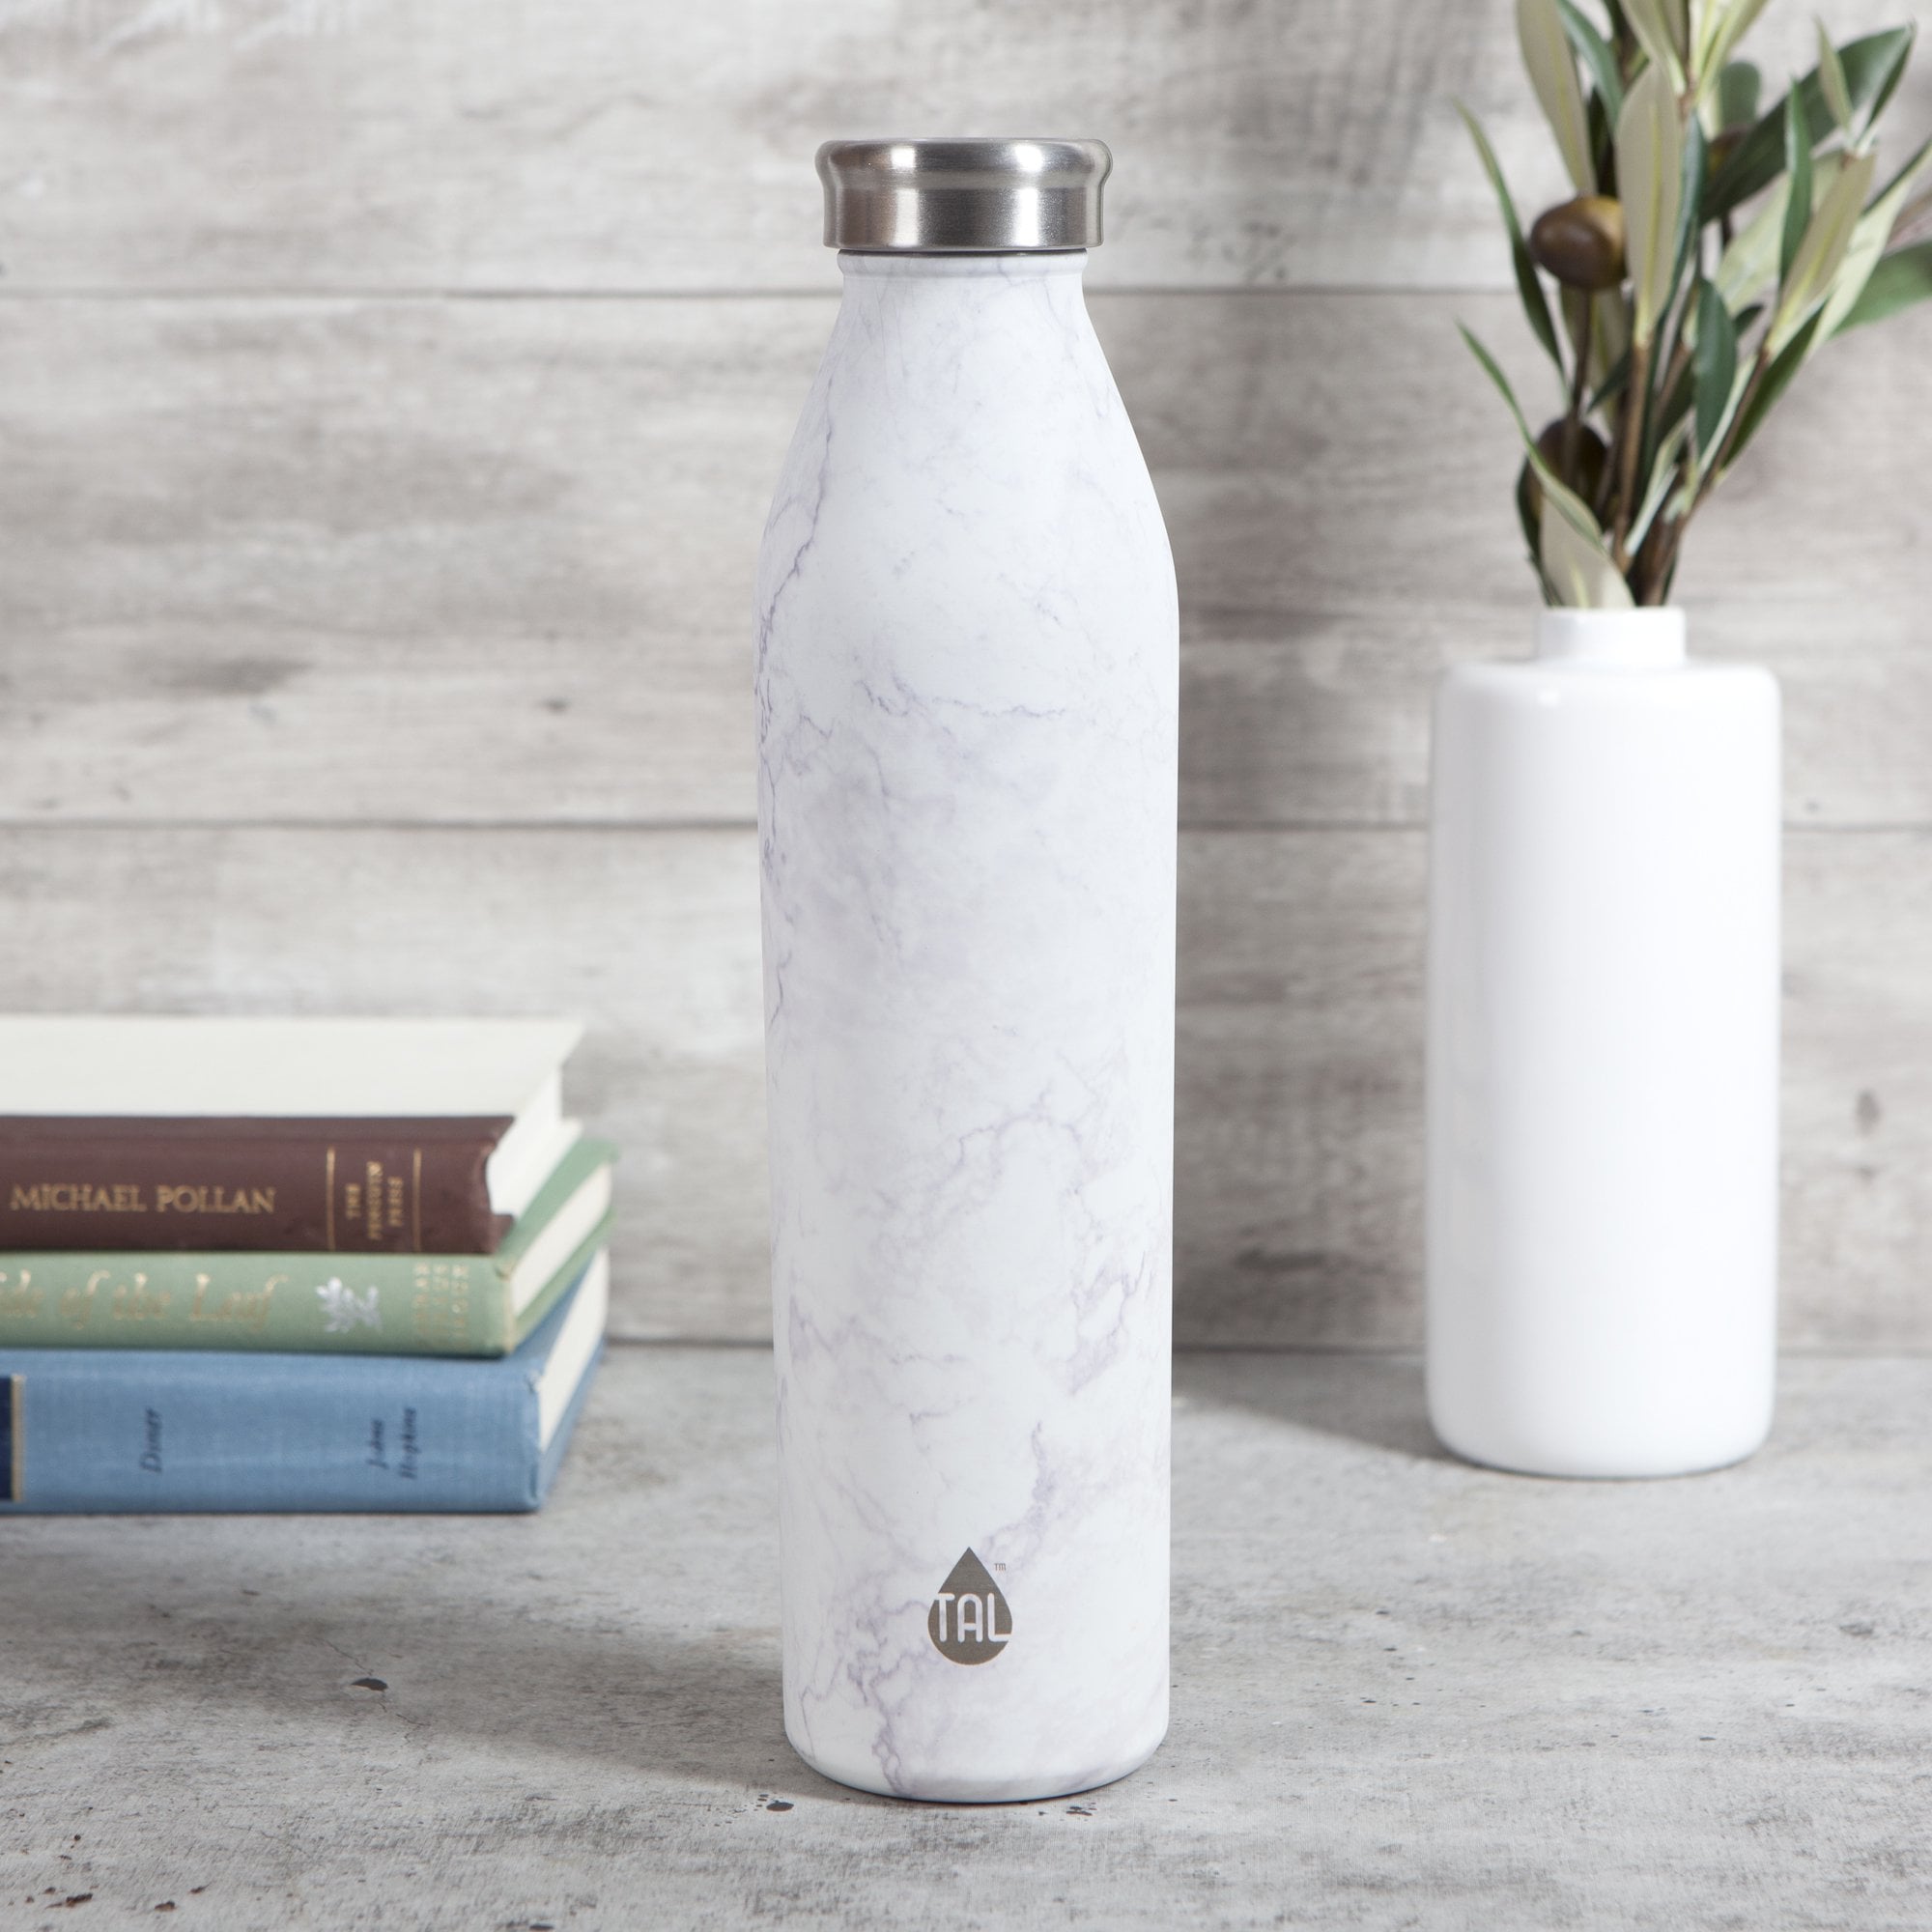 tal insulated bottle